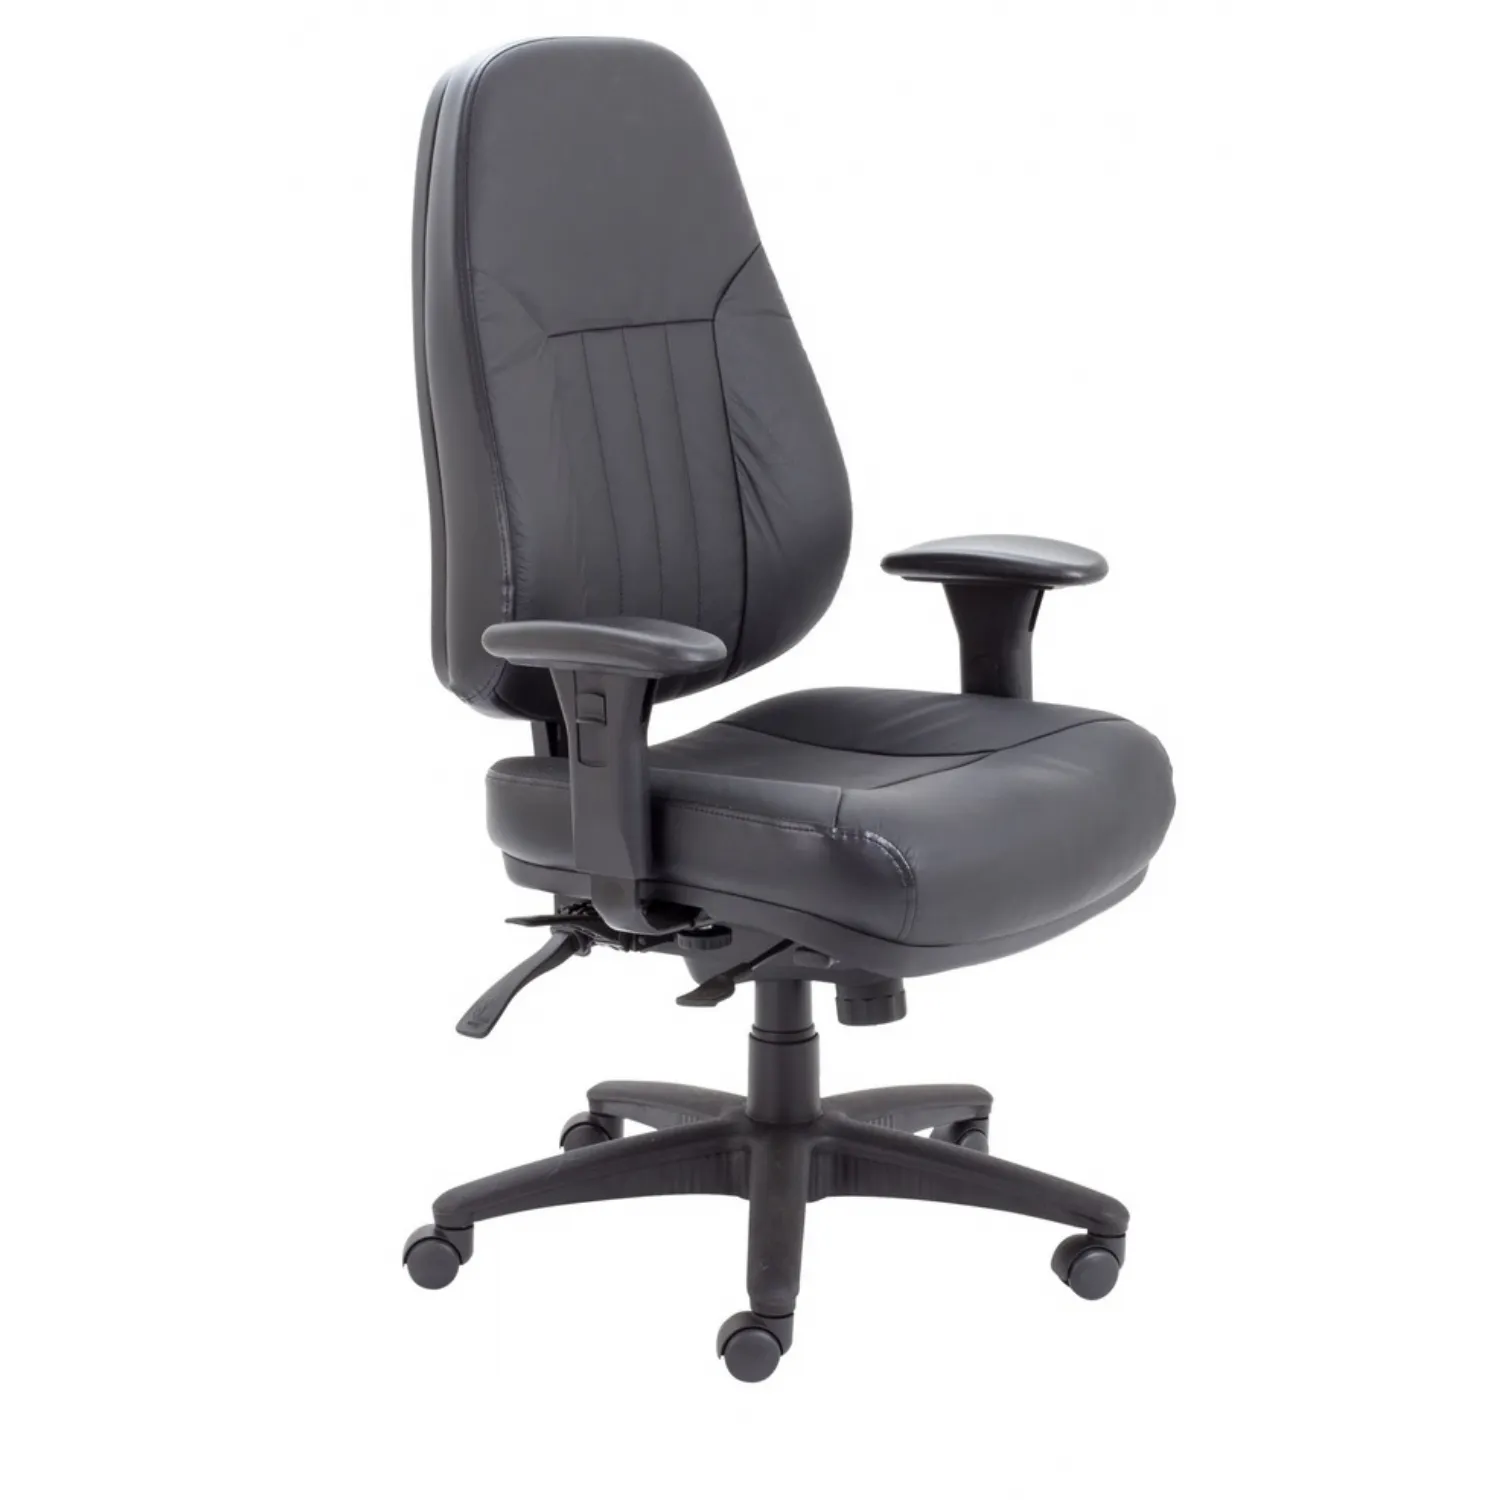 Black Leather Executive Office Chair 24 Hour